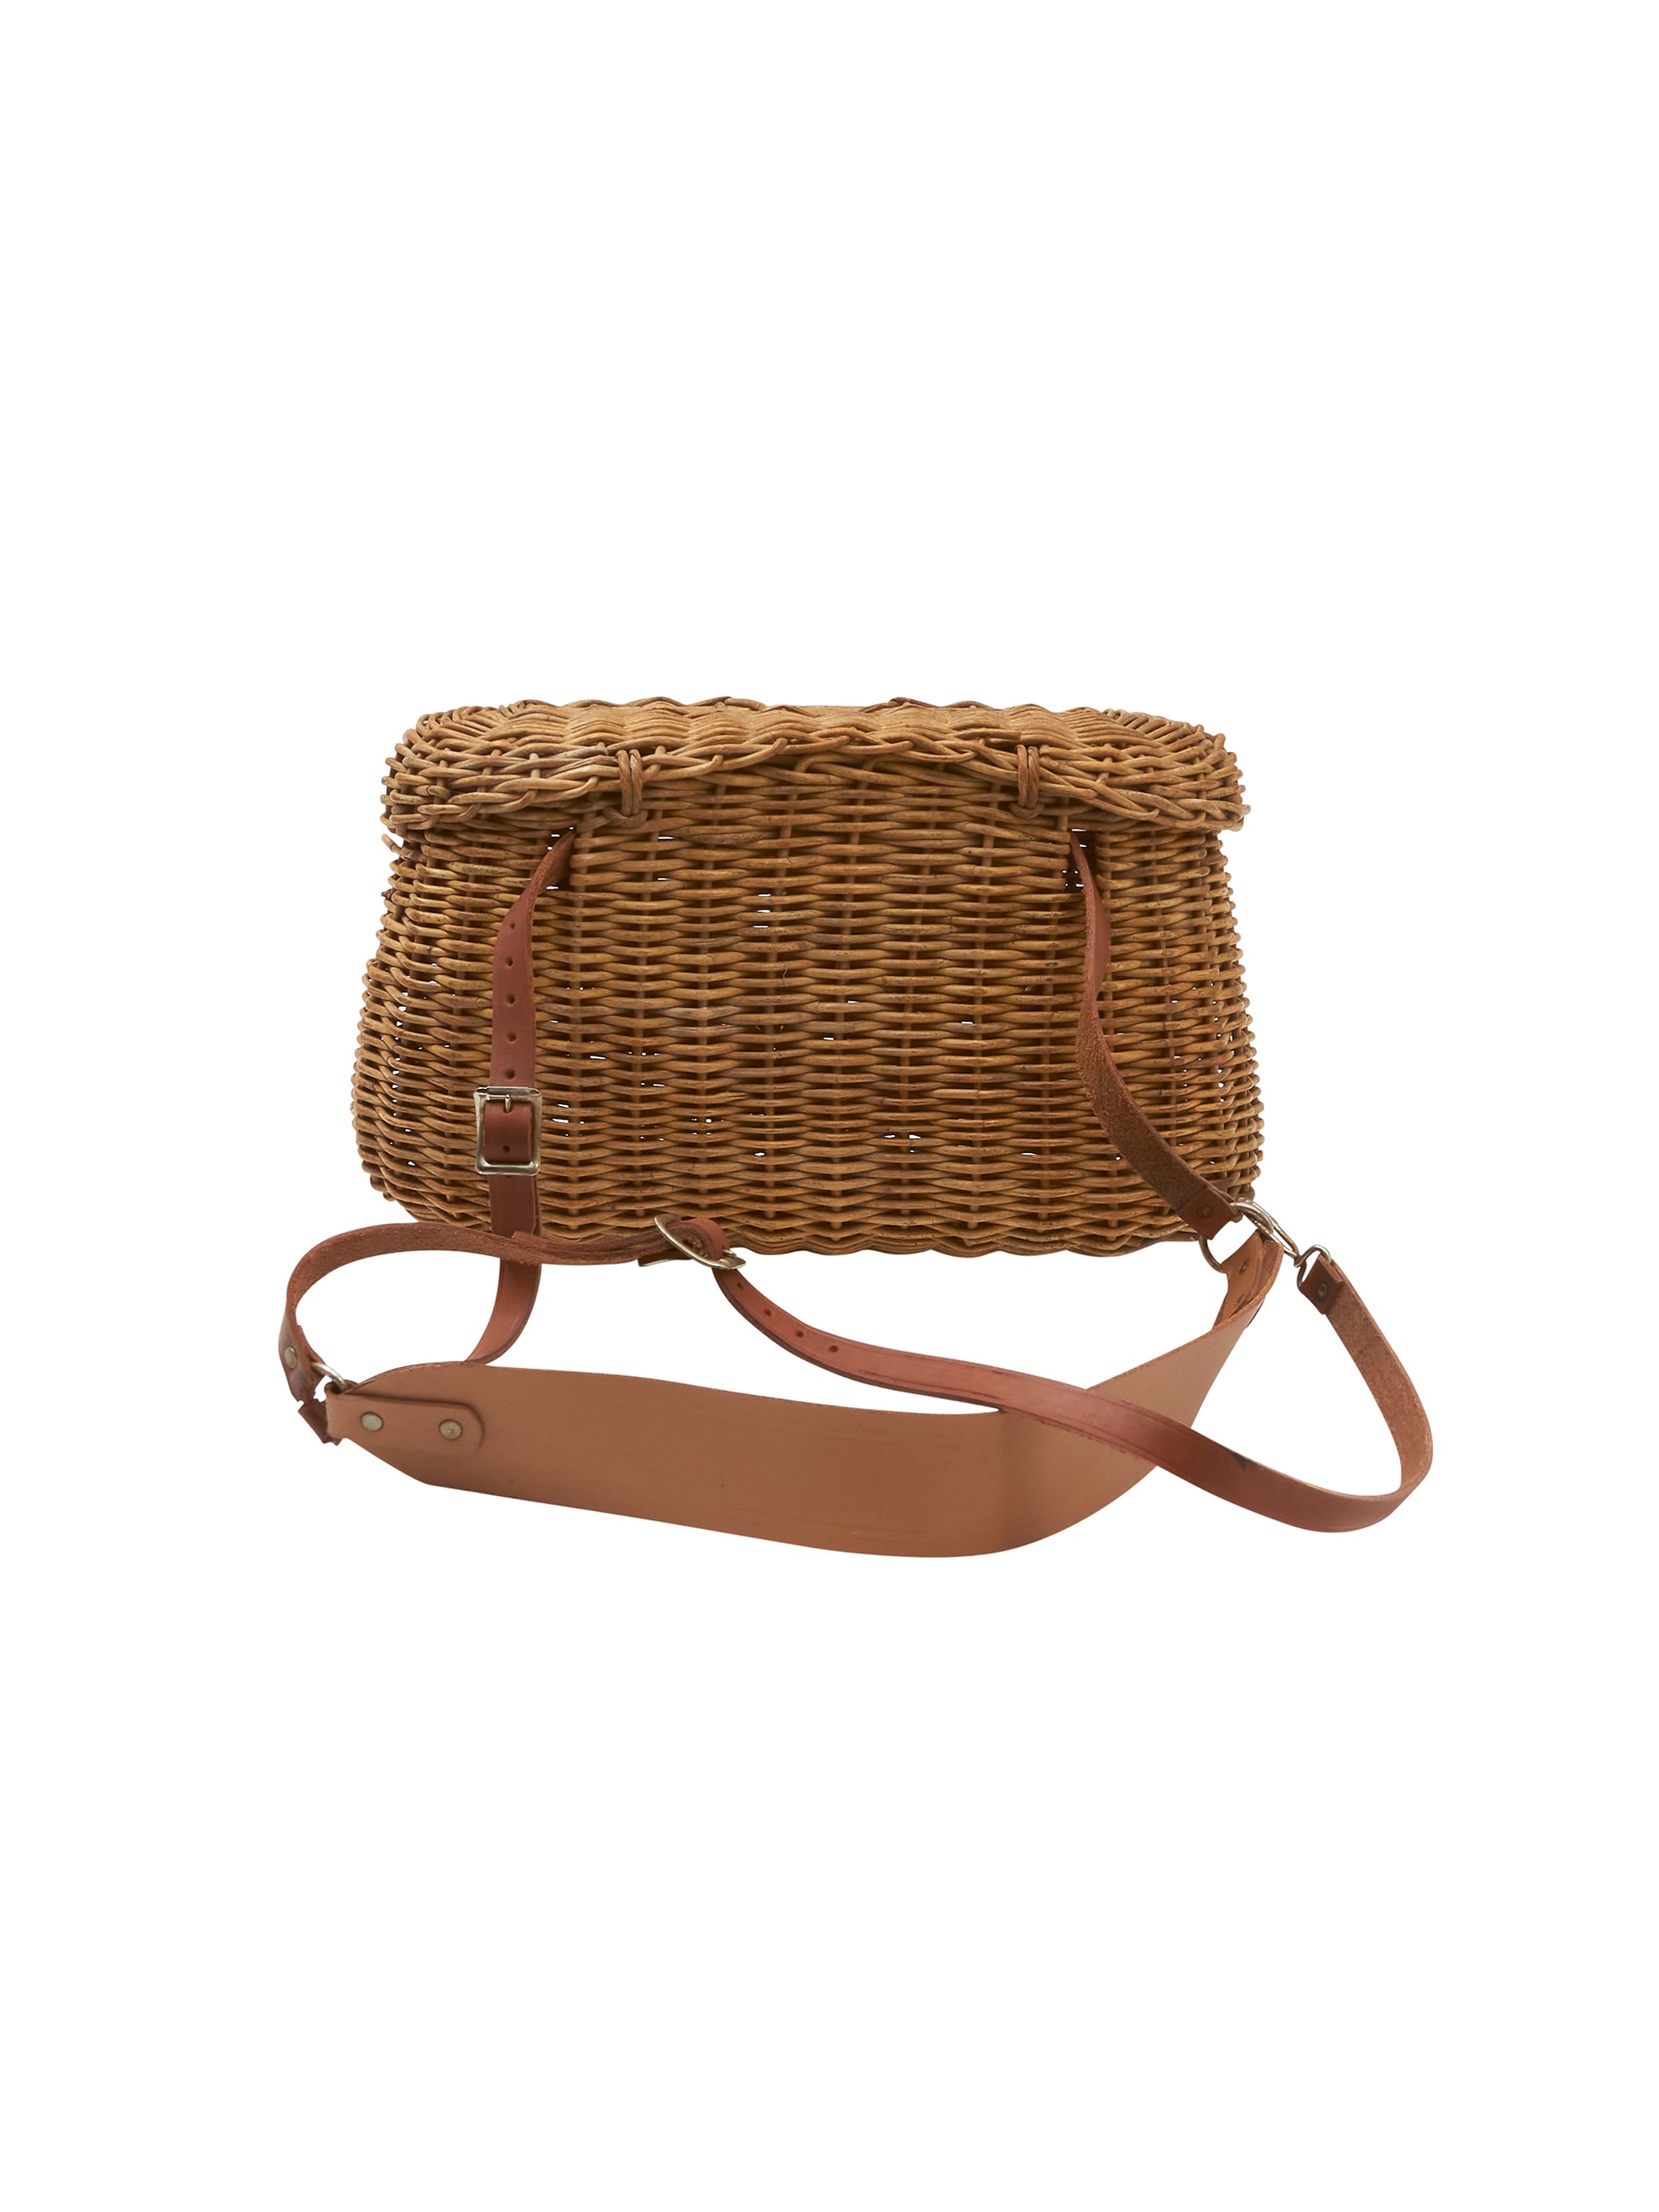 Small Wicker Fishing Basket with Hole for Small Wooden Fishing Pole with  Hook on the End Stock Photo - Image of hole, antique: 253575450